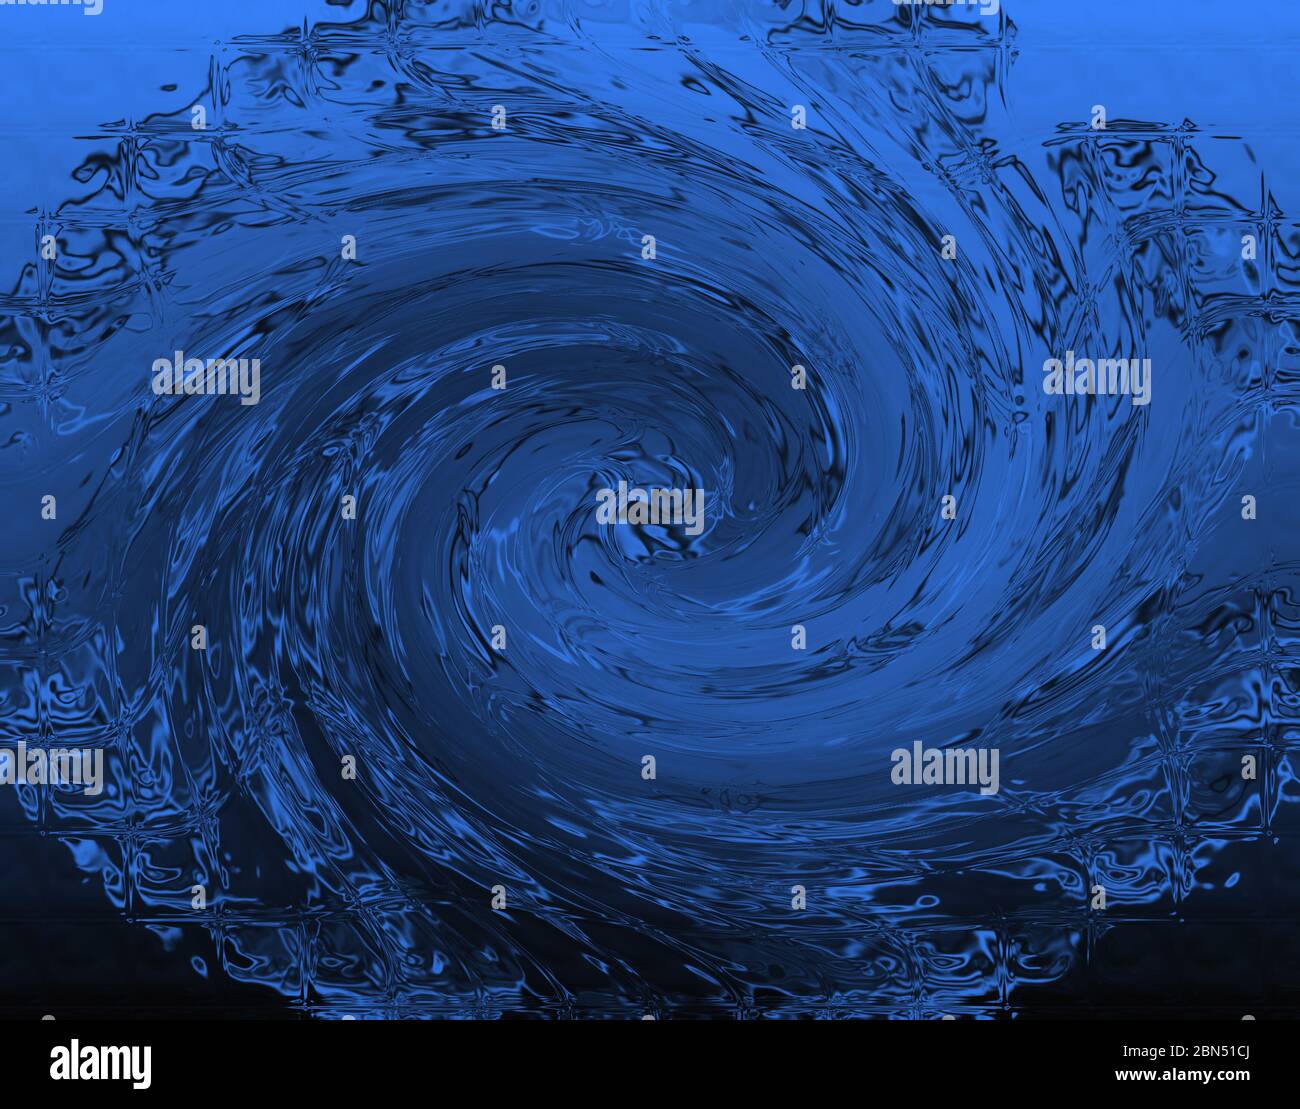 A swirling wave creating a vortex of blue water, concept for storm, hurricane, whirlpool, summer Stock Photo